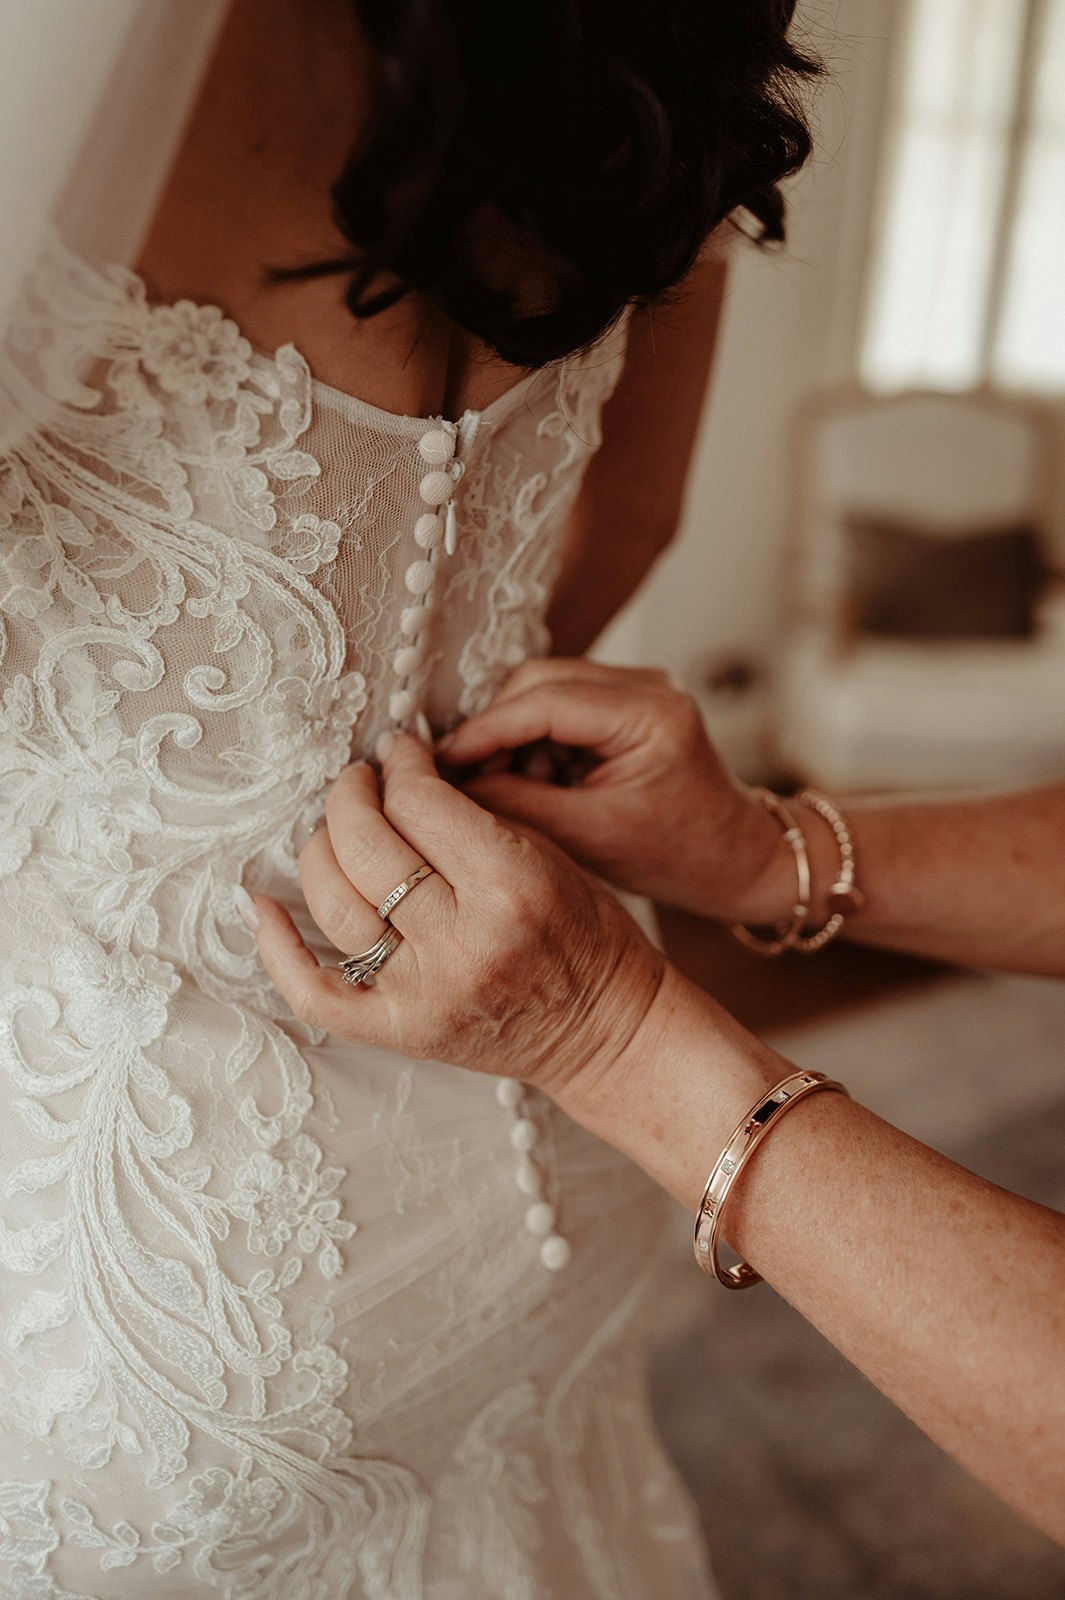 Mother of bride doing wedding dress buttons up